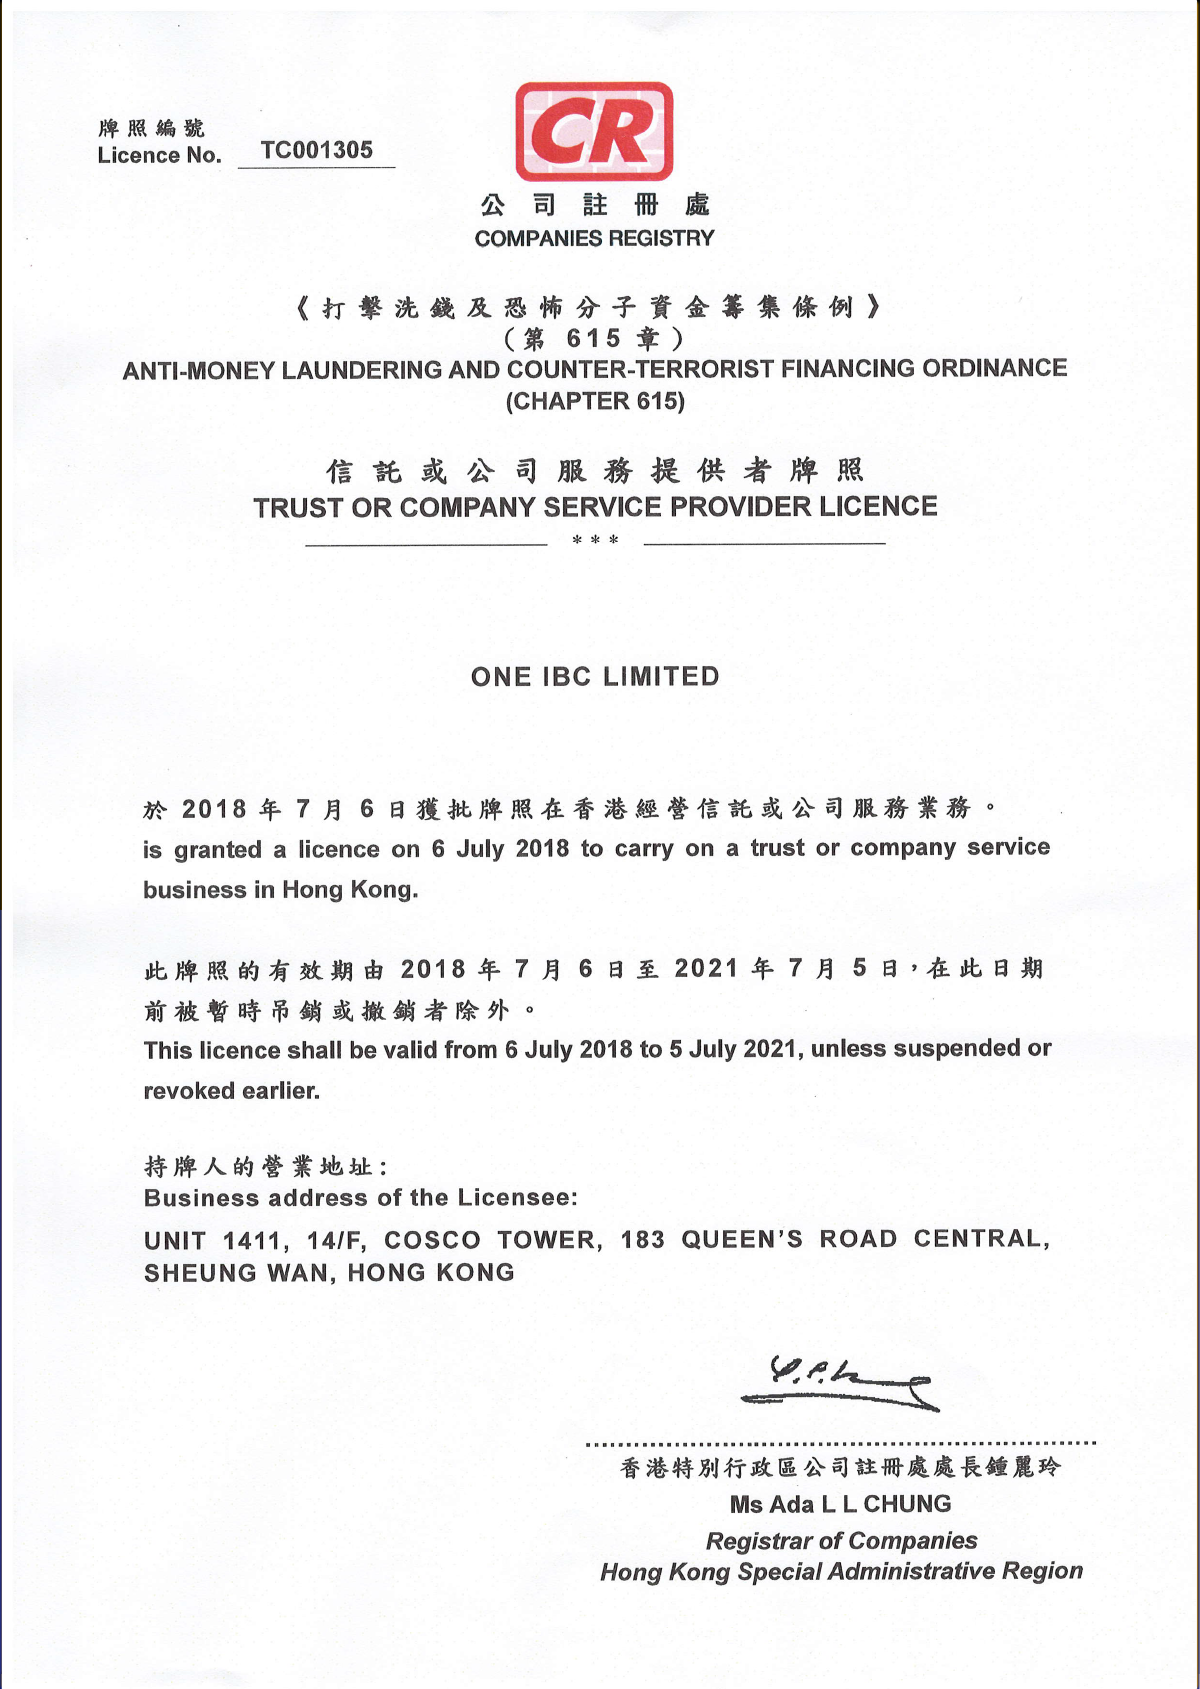 One IBC Limited (Incorporated in Hong Kong) owns The Trust or Company Service Provider License (TCSP) in Hong Kong